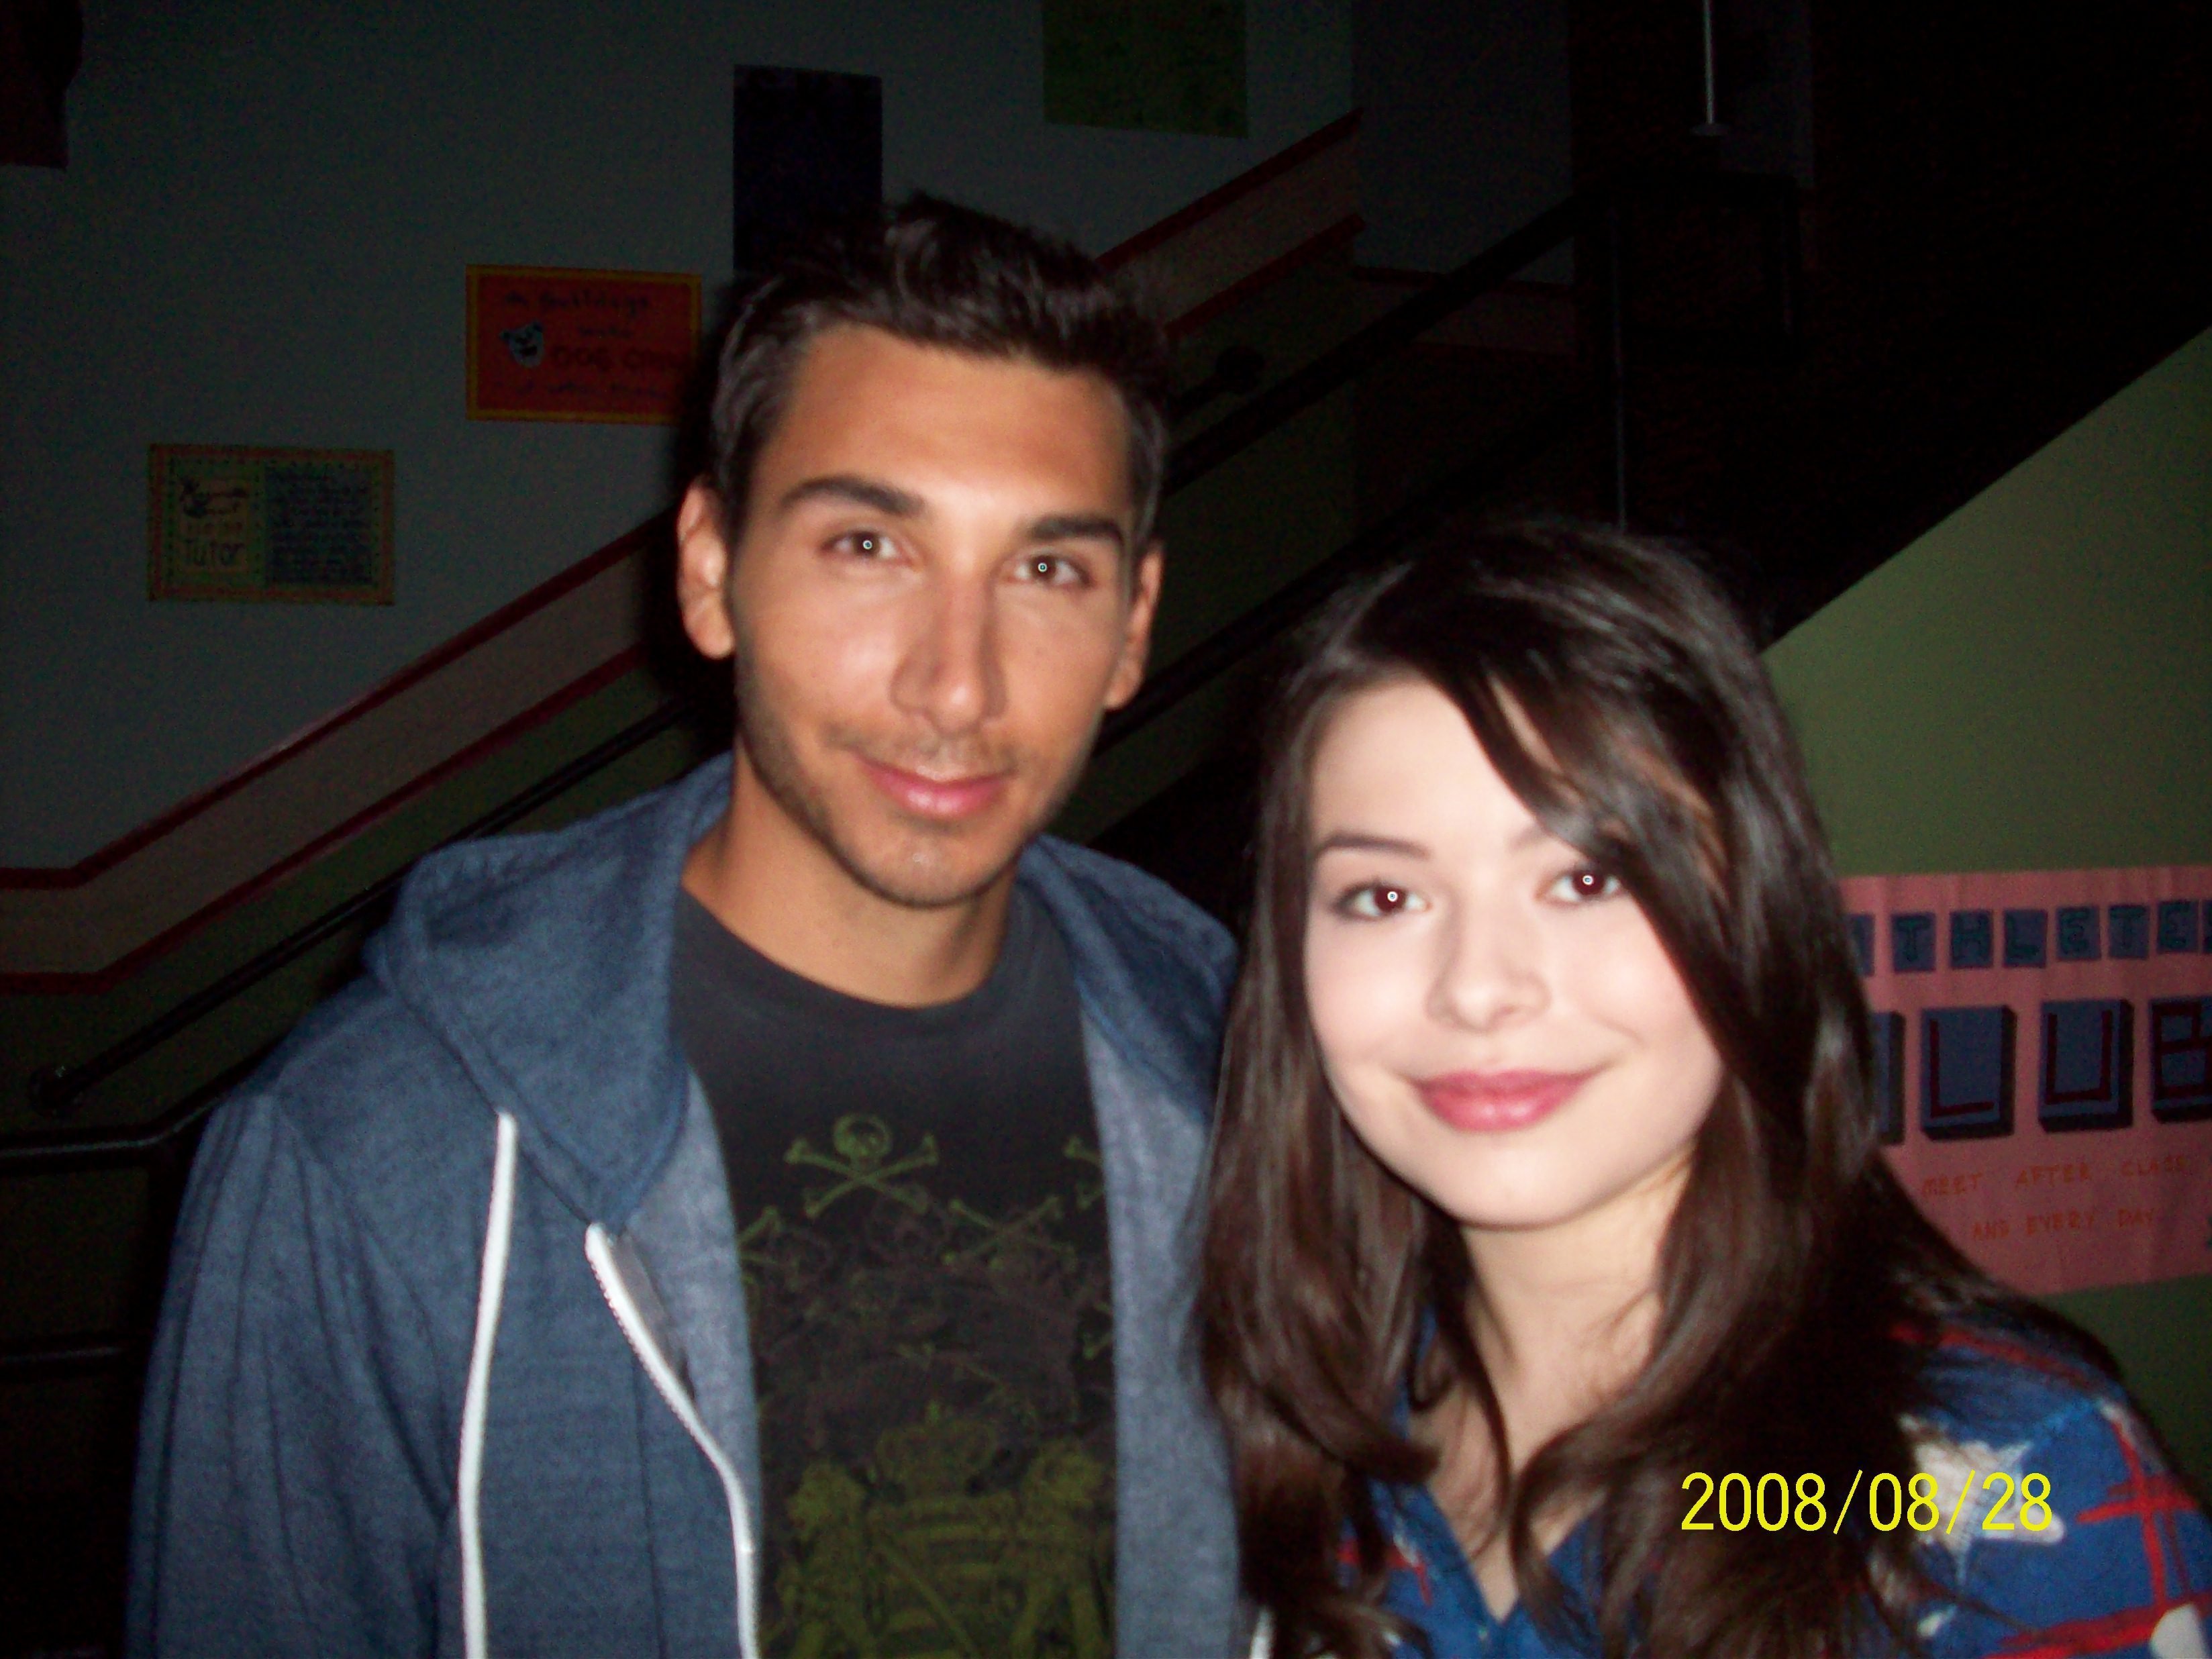 Gil Menchaca and Miranda Cosgrove on the set of ICARLY.